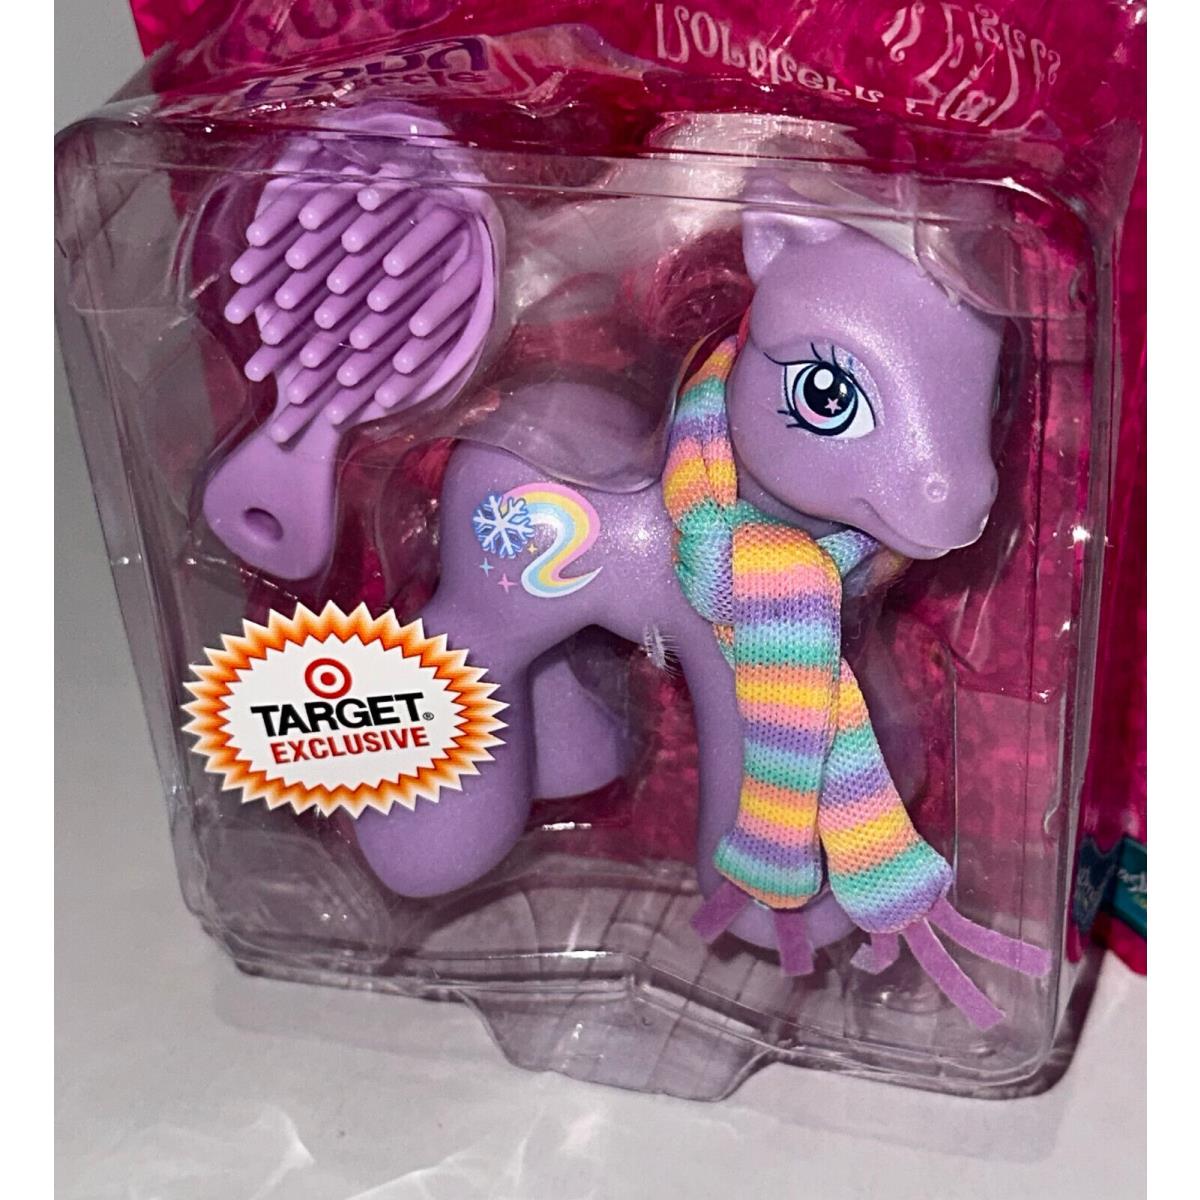 2006 Hasbro My Little Pony G3 Baby Northern Lights Target Exclusive